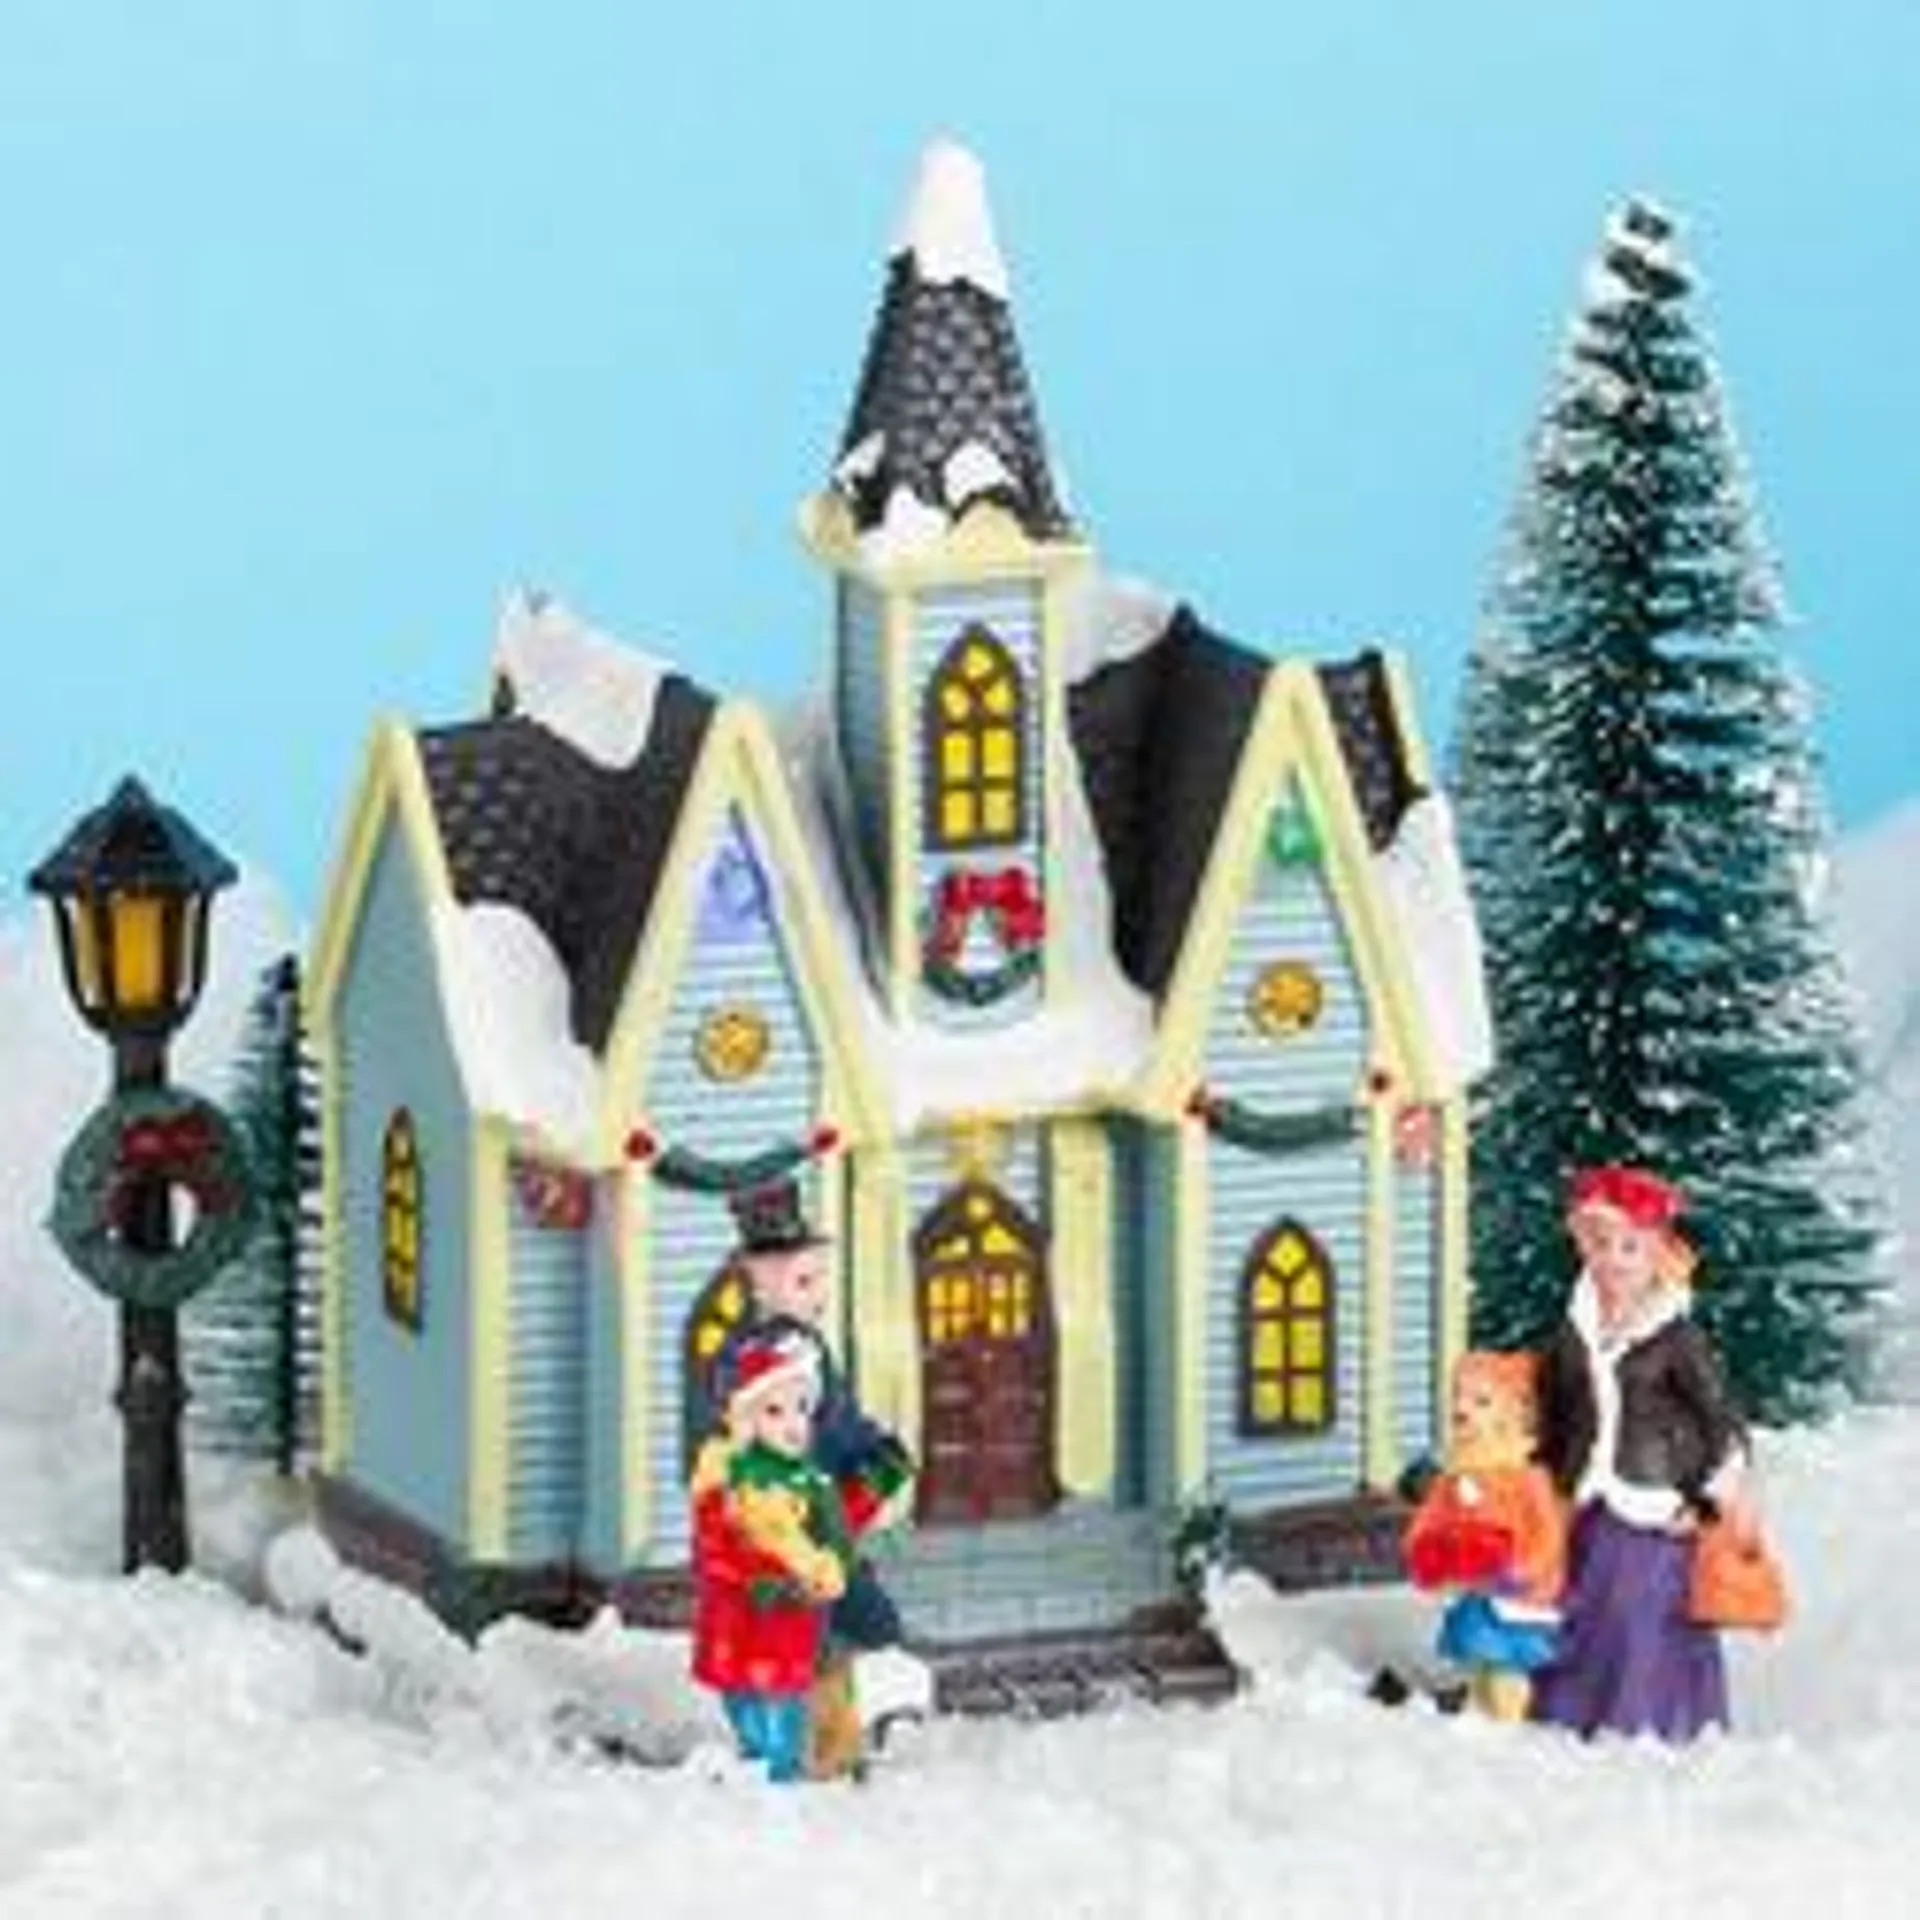 Lighted Miniature Christmas Village Caroler Set (Package of 6 pieces)